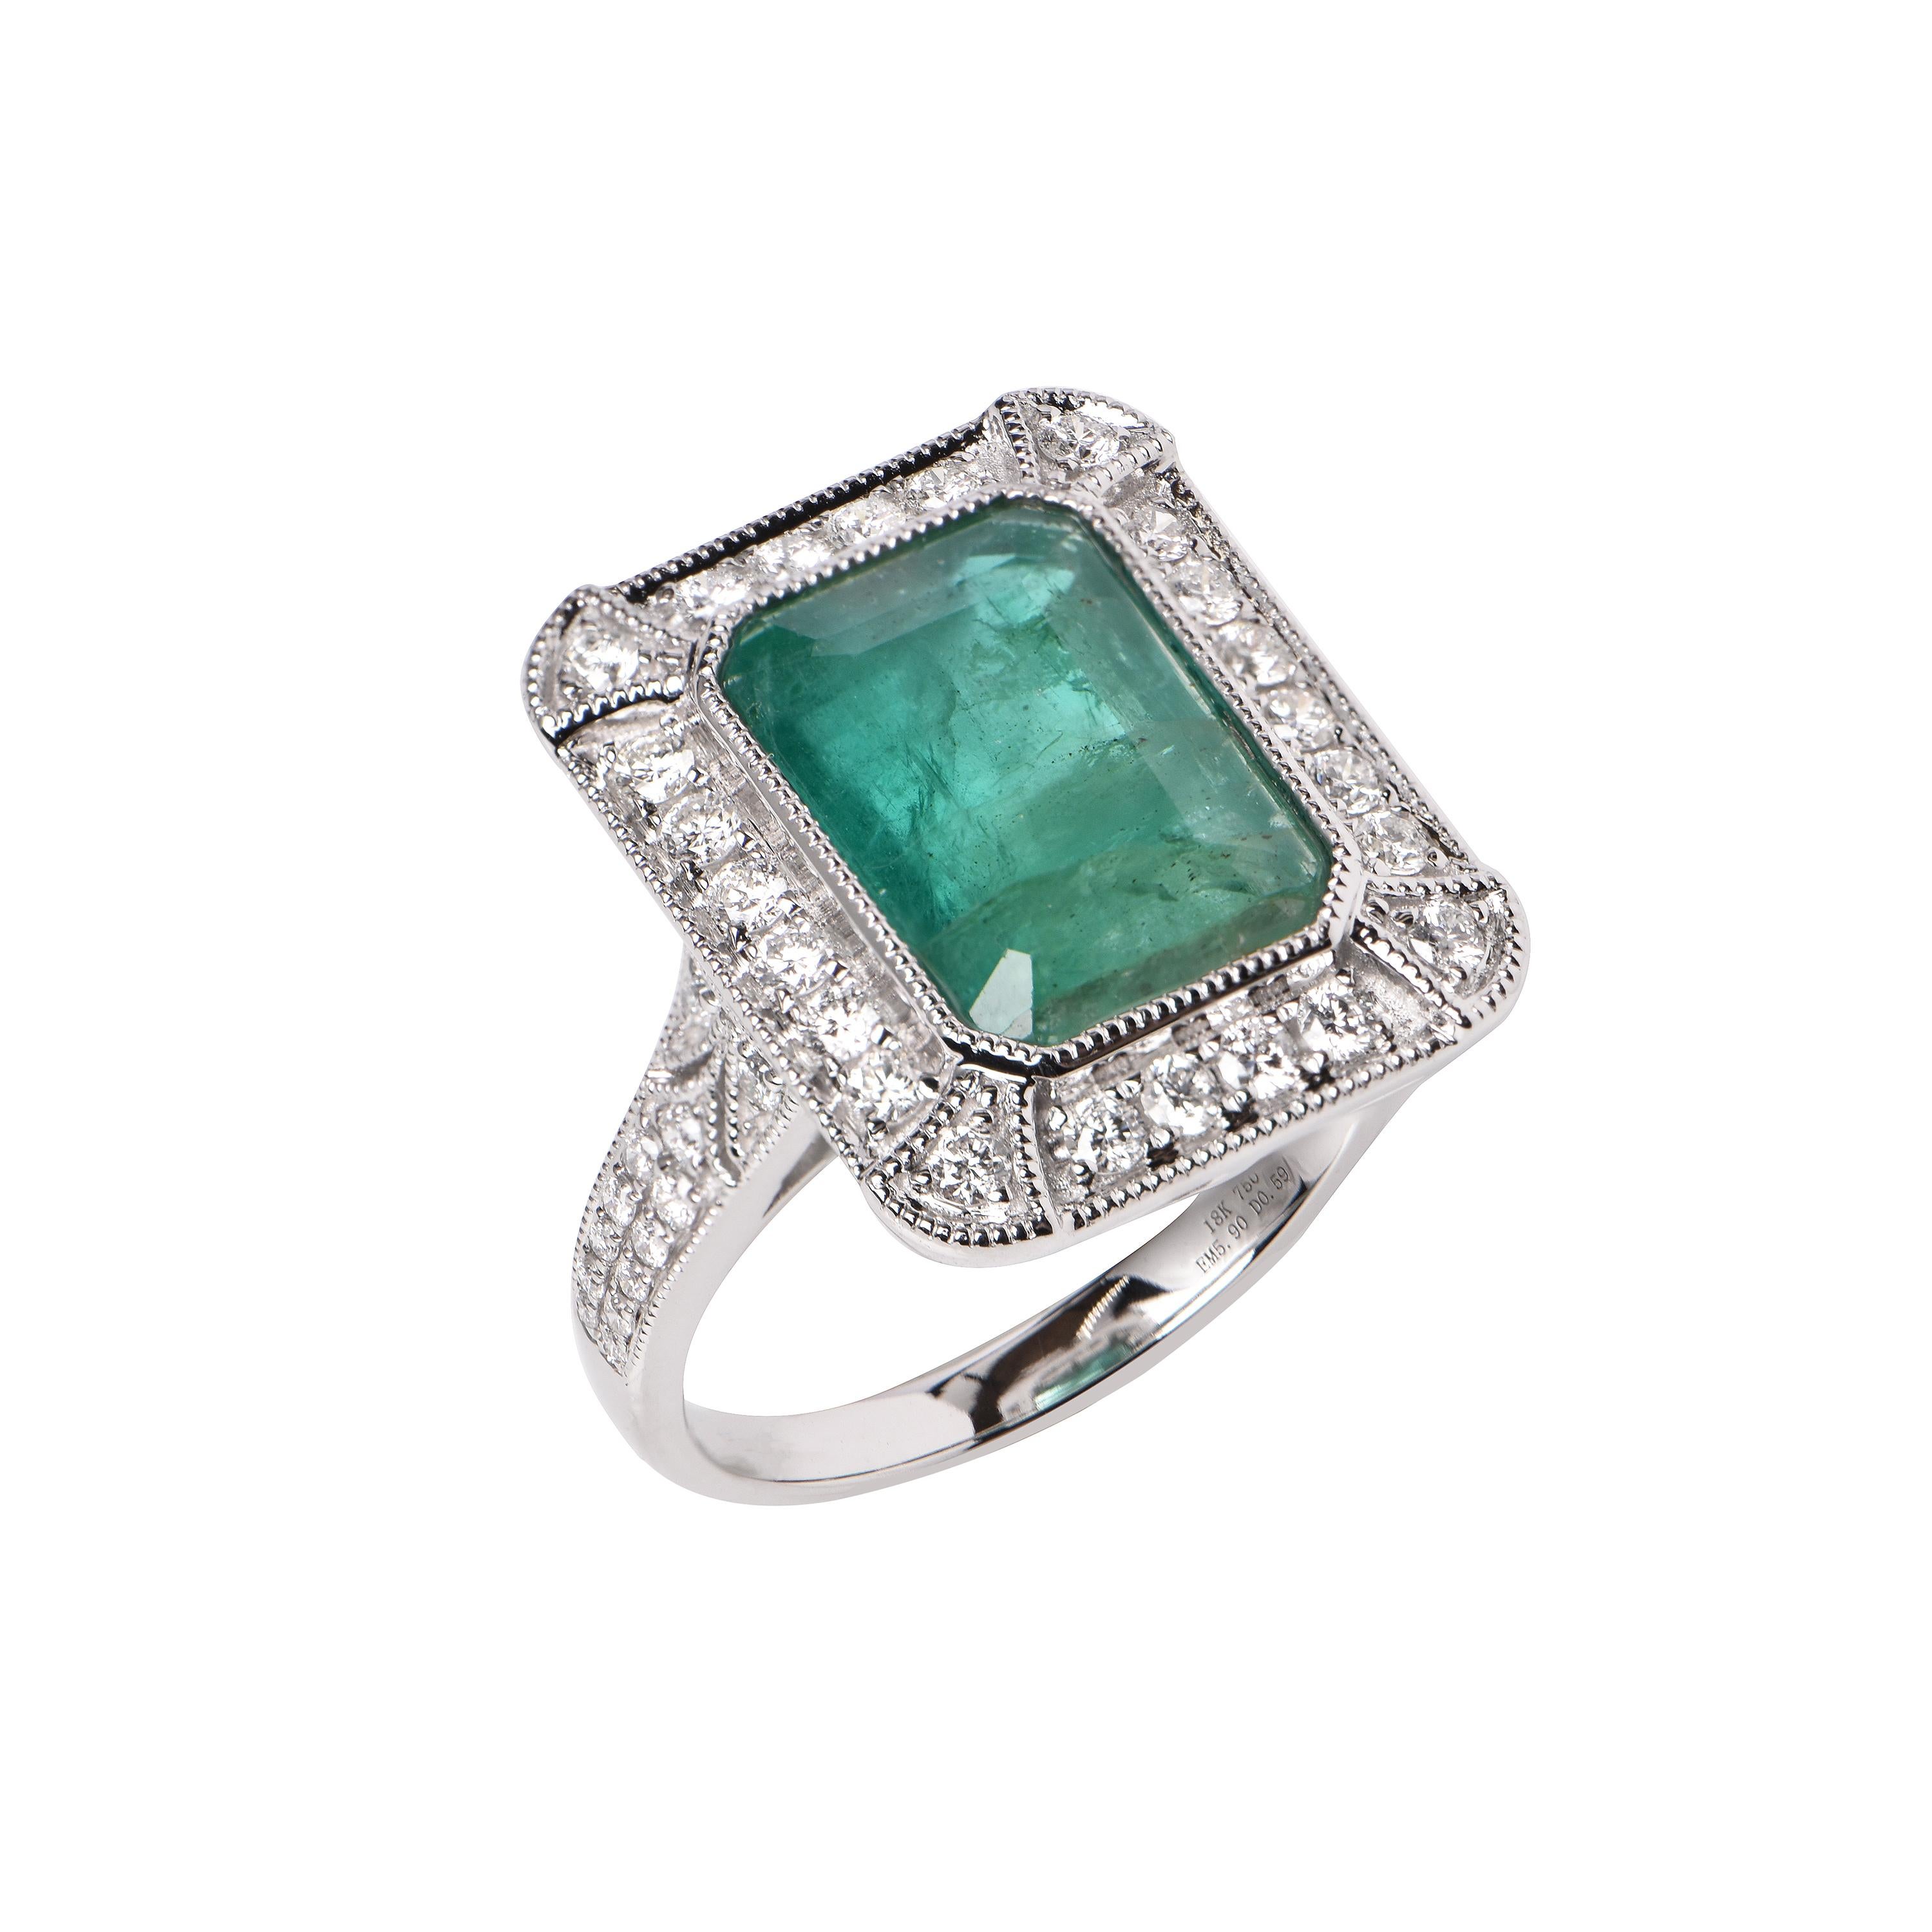 An 18ct White Gold ring showcasing an Emerald (5.90ct), and 50 Diamonds totalling 0.59ct.
